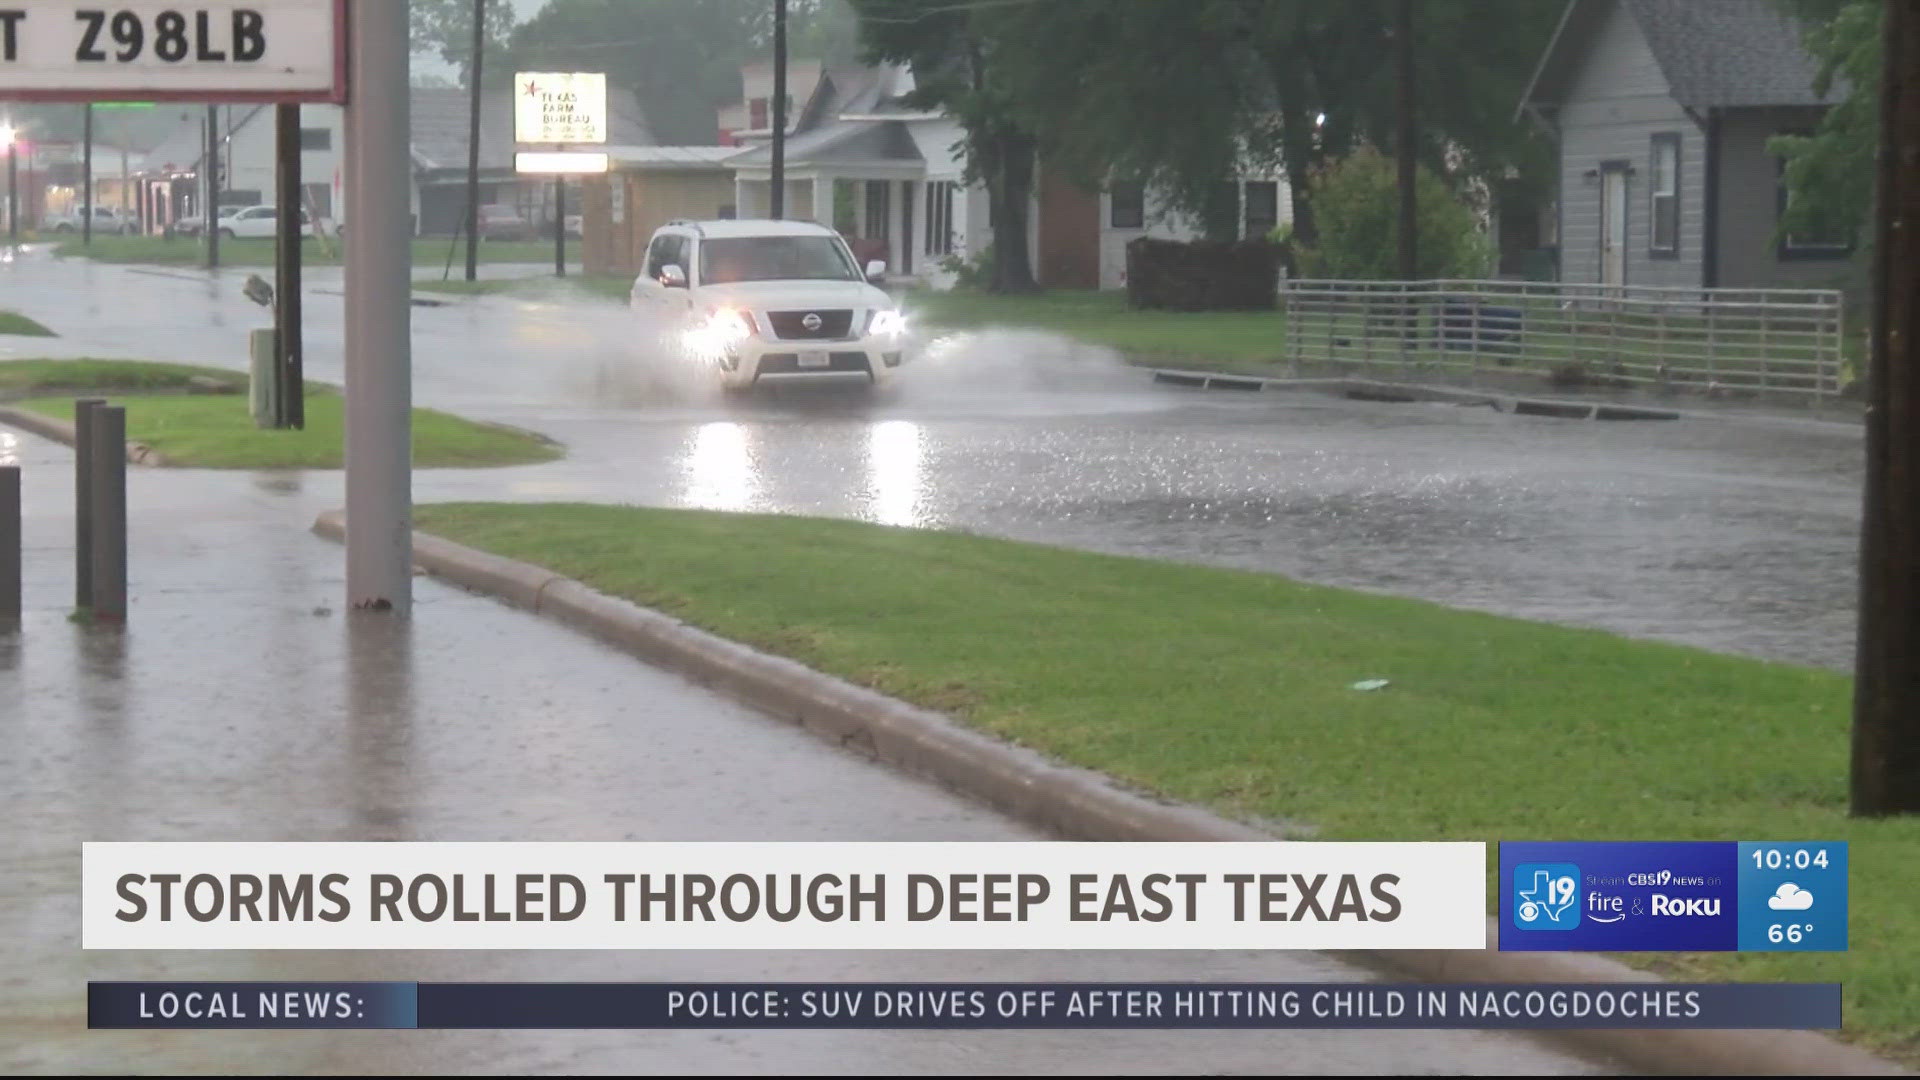 Deep East Texas hit with storms that caused flooding, power outages throughout the area. Some school districts in the area have announced school closures.